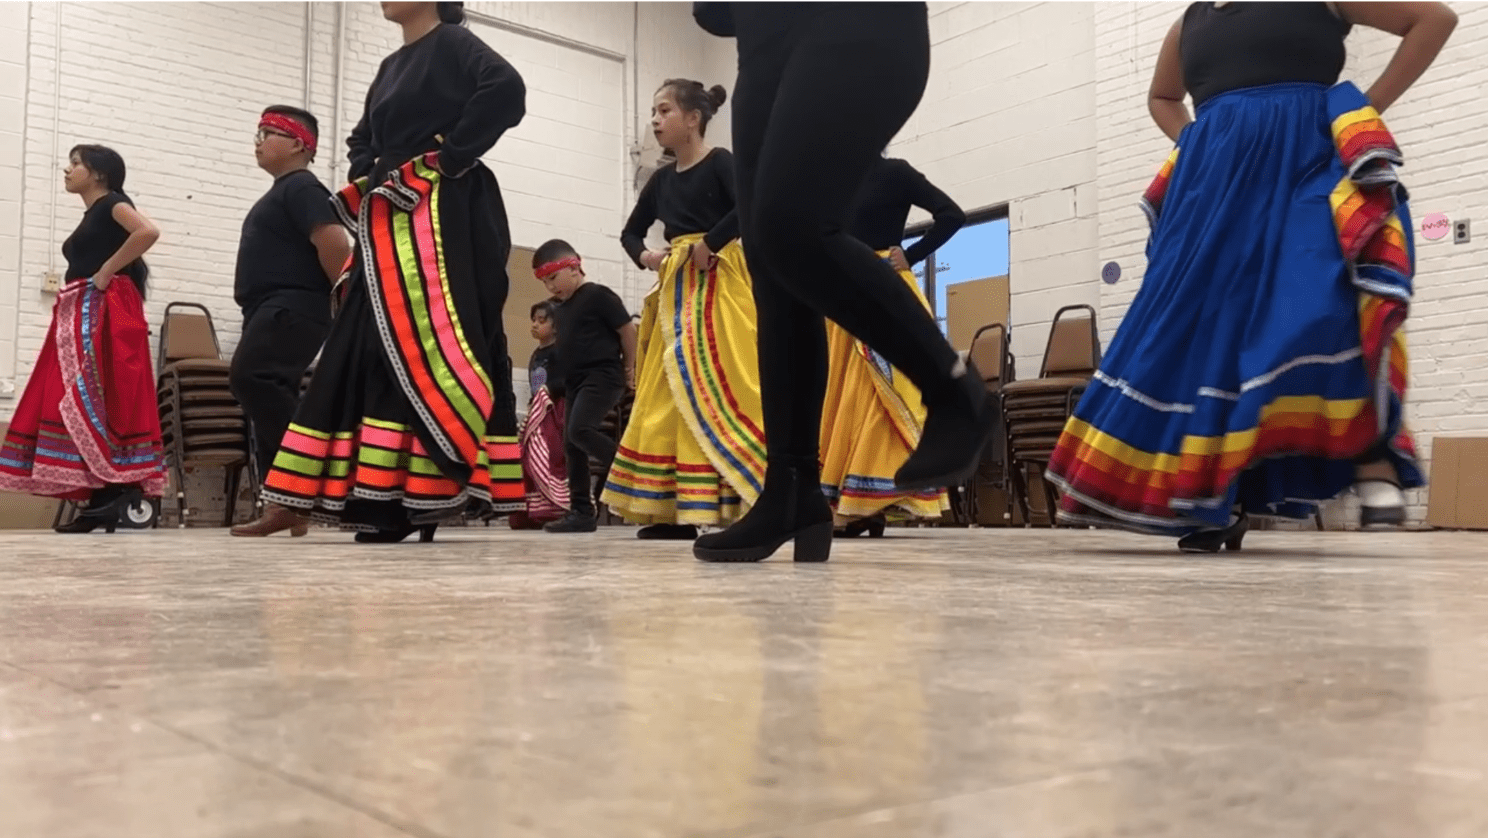 Mexican Folkloric Dance Troupe dancing